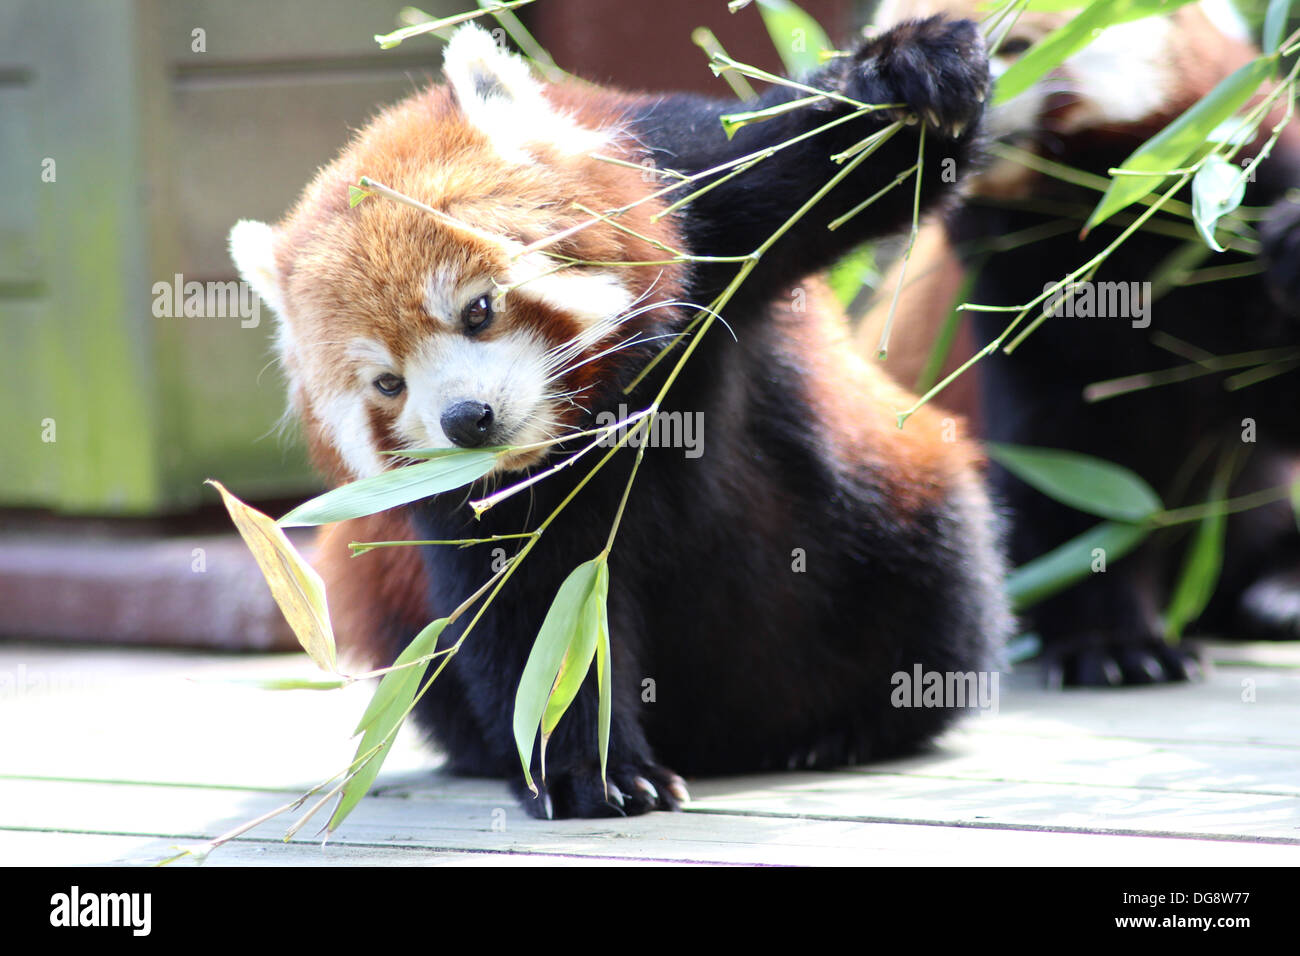 Looking more like a Racoon than a Giant Panda, the Red Panda has striking chestnut fur, a bushy, striped tail and a white face. Stock Photo